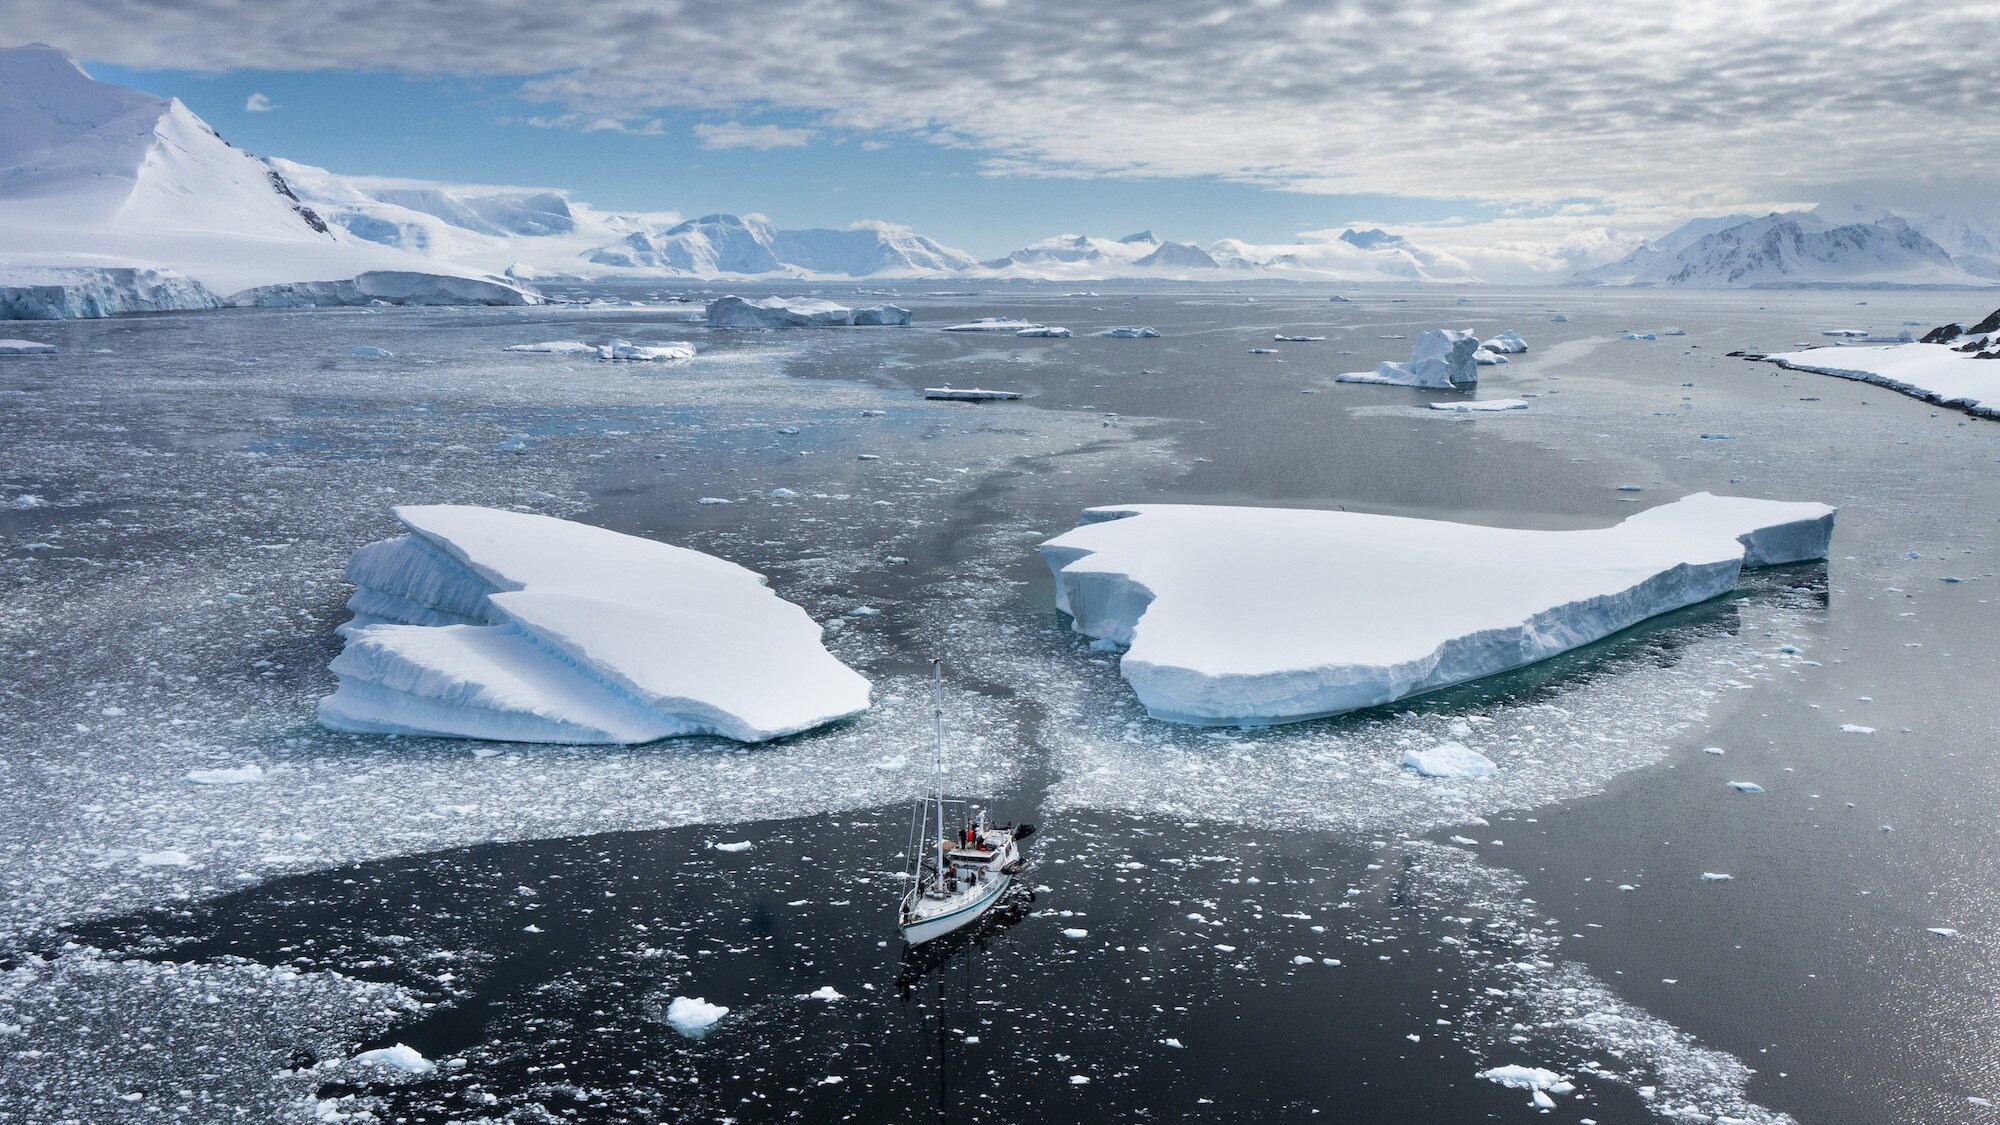 Aerial shot of Australis sailing between two large ice sheets. (credit: National Geographic for Disney+/Bertie Gregory)